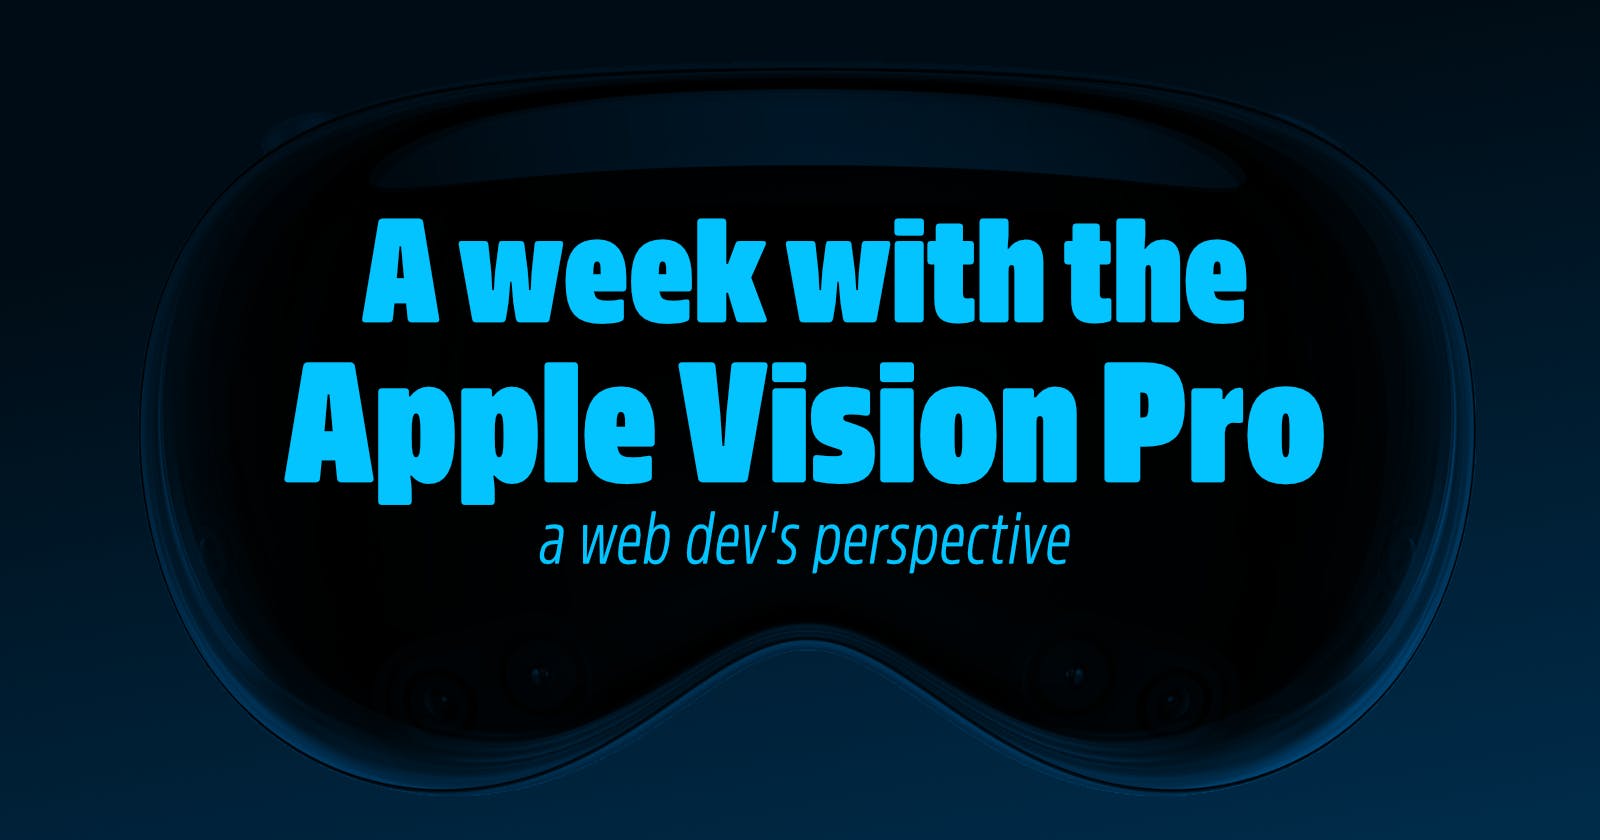 A week with the Apple Vision Pro